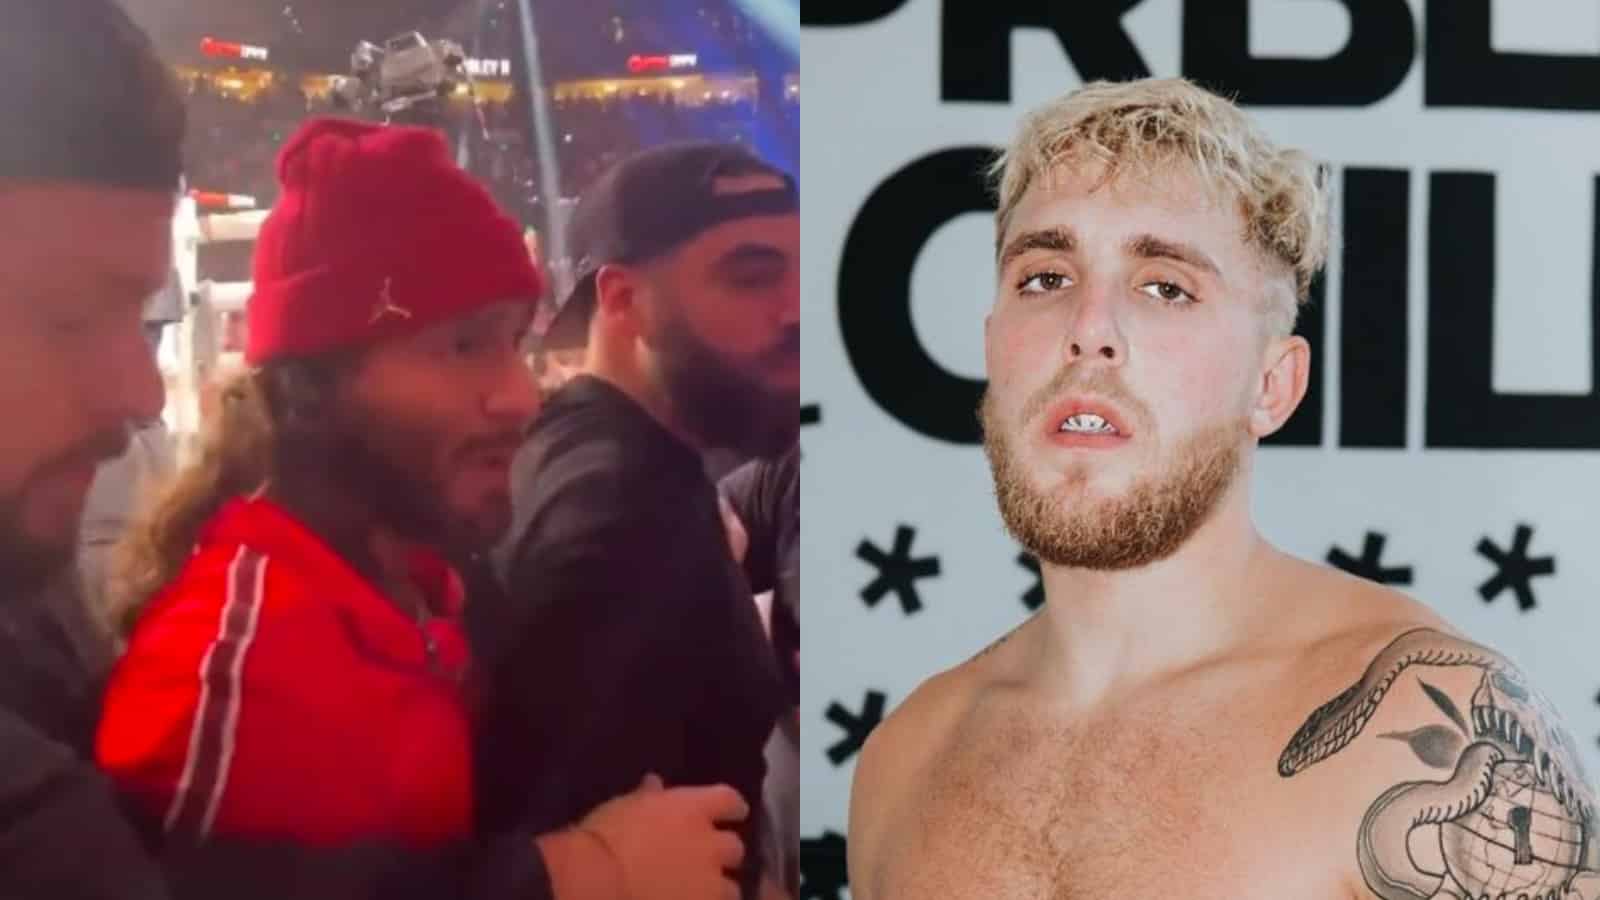 Masvadal gets into altercation at Jake Paul fight